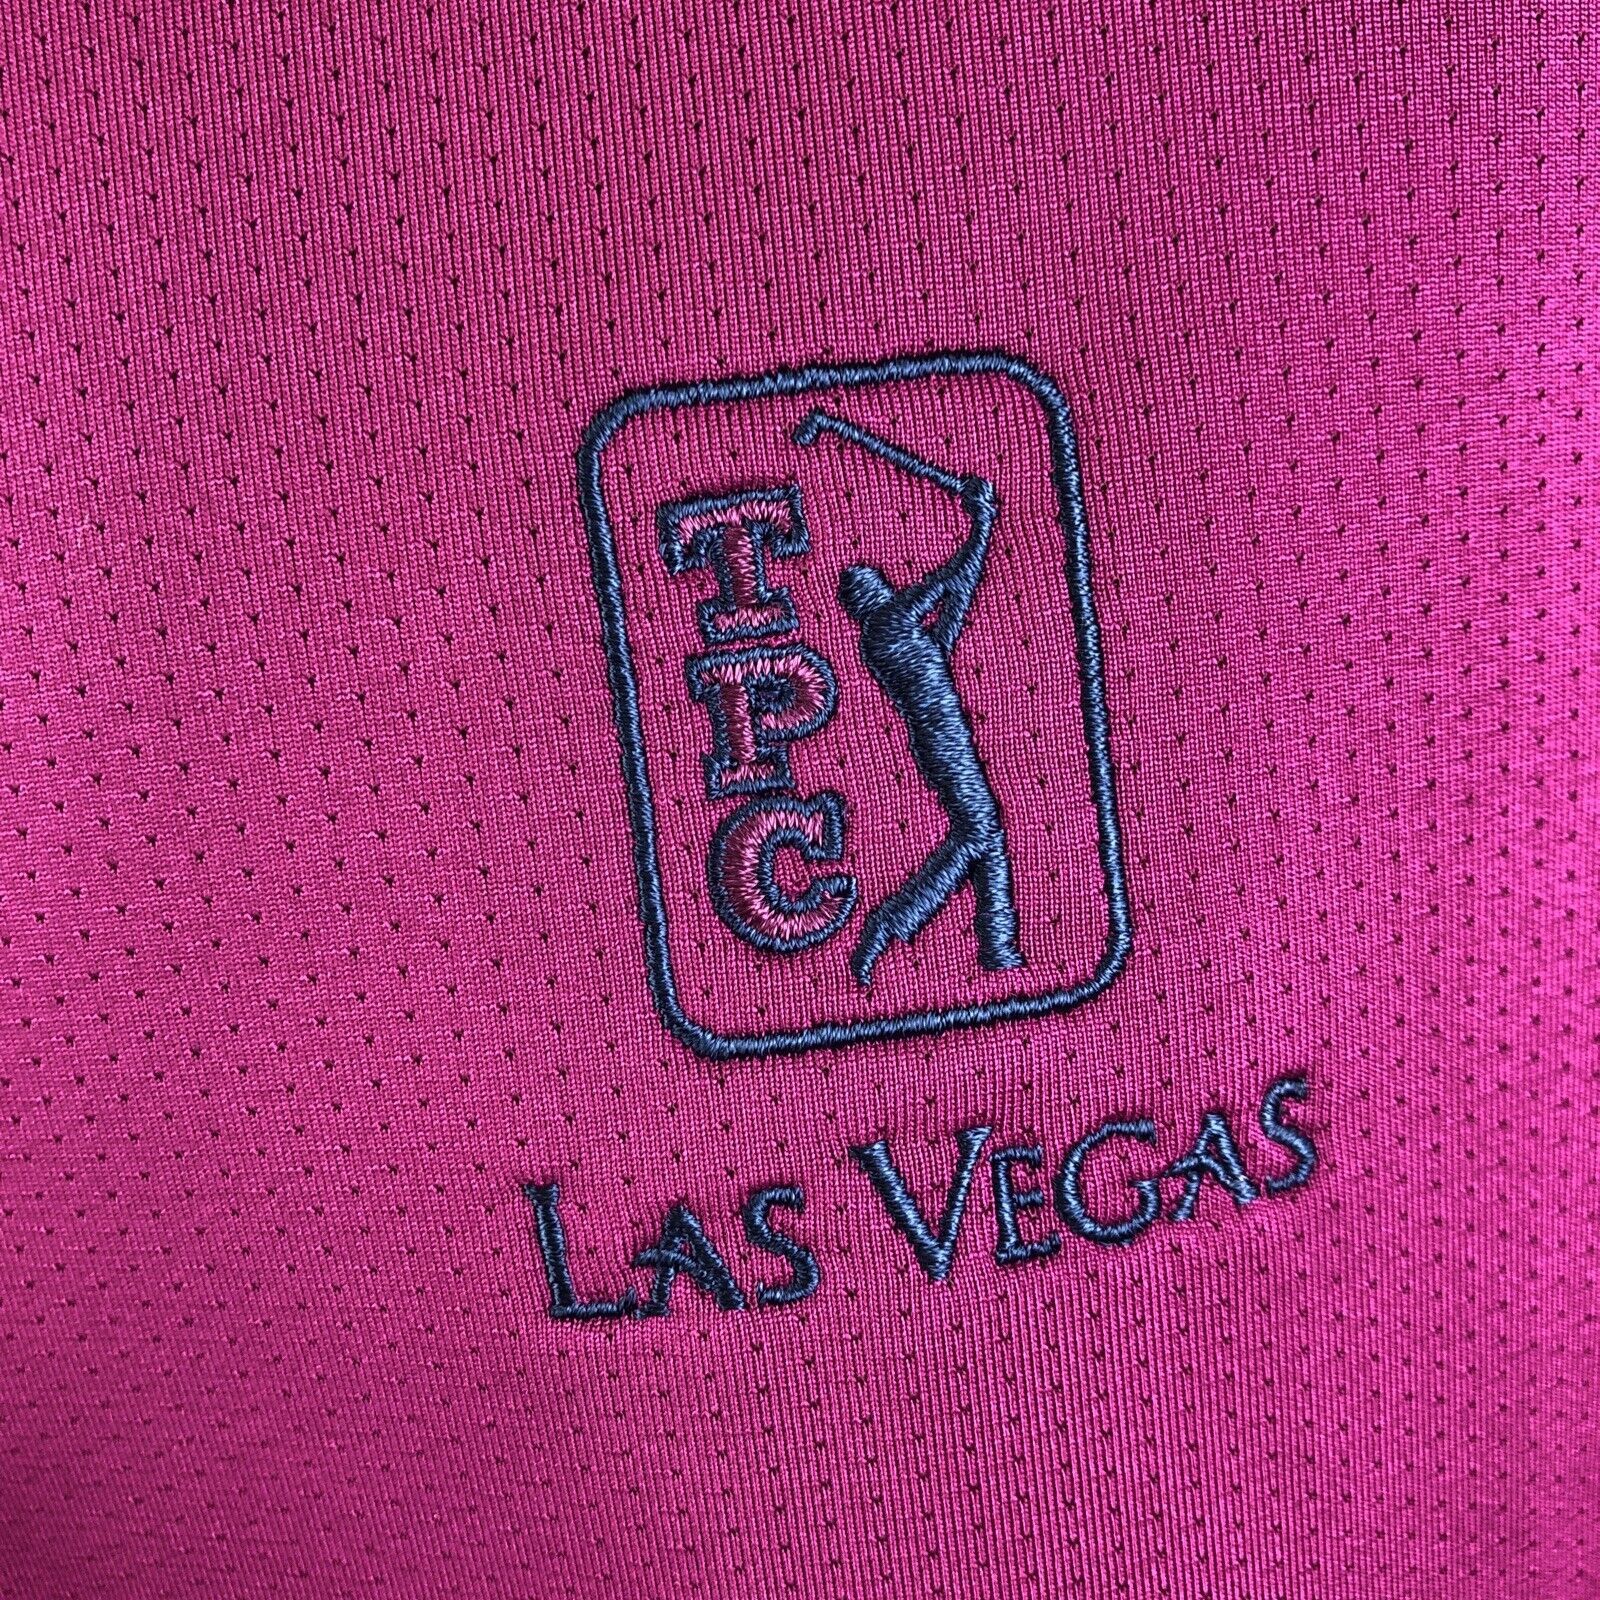 Primary image for Adidas Climacool Mens Golf Shirt XL The Players Course TPC Las Vegas Fuchsia VGC